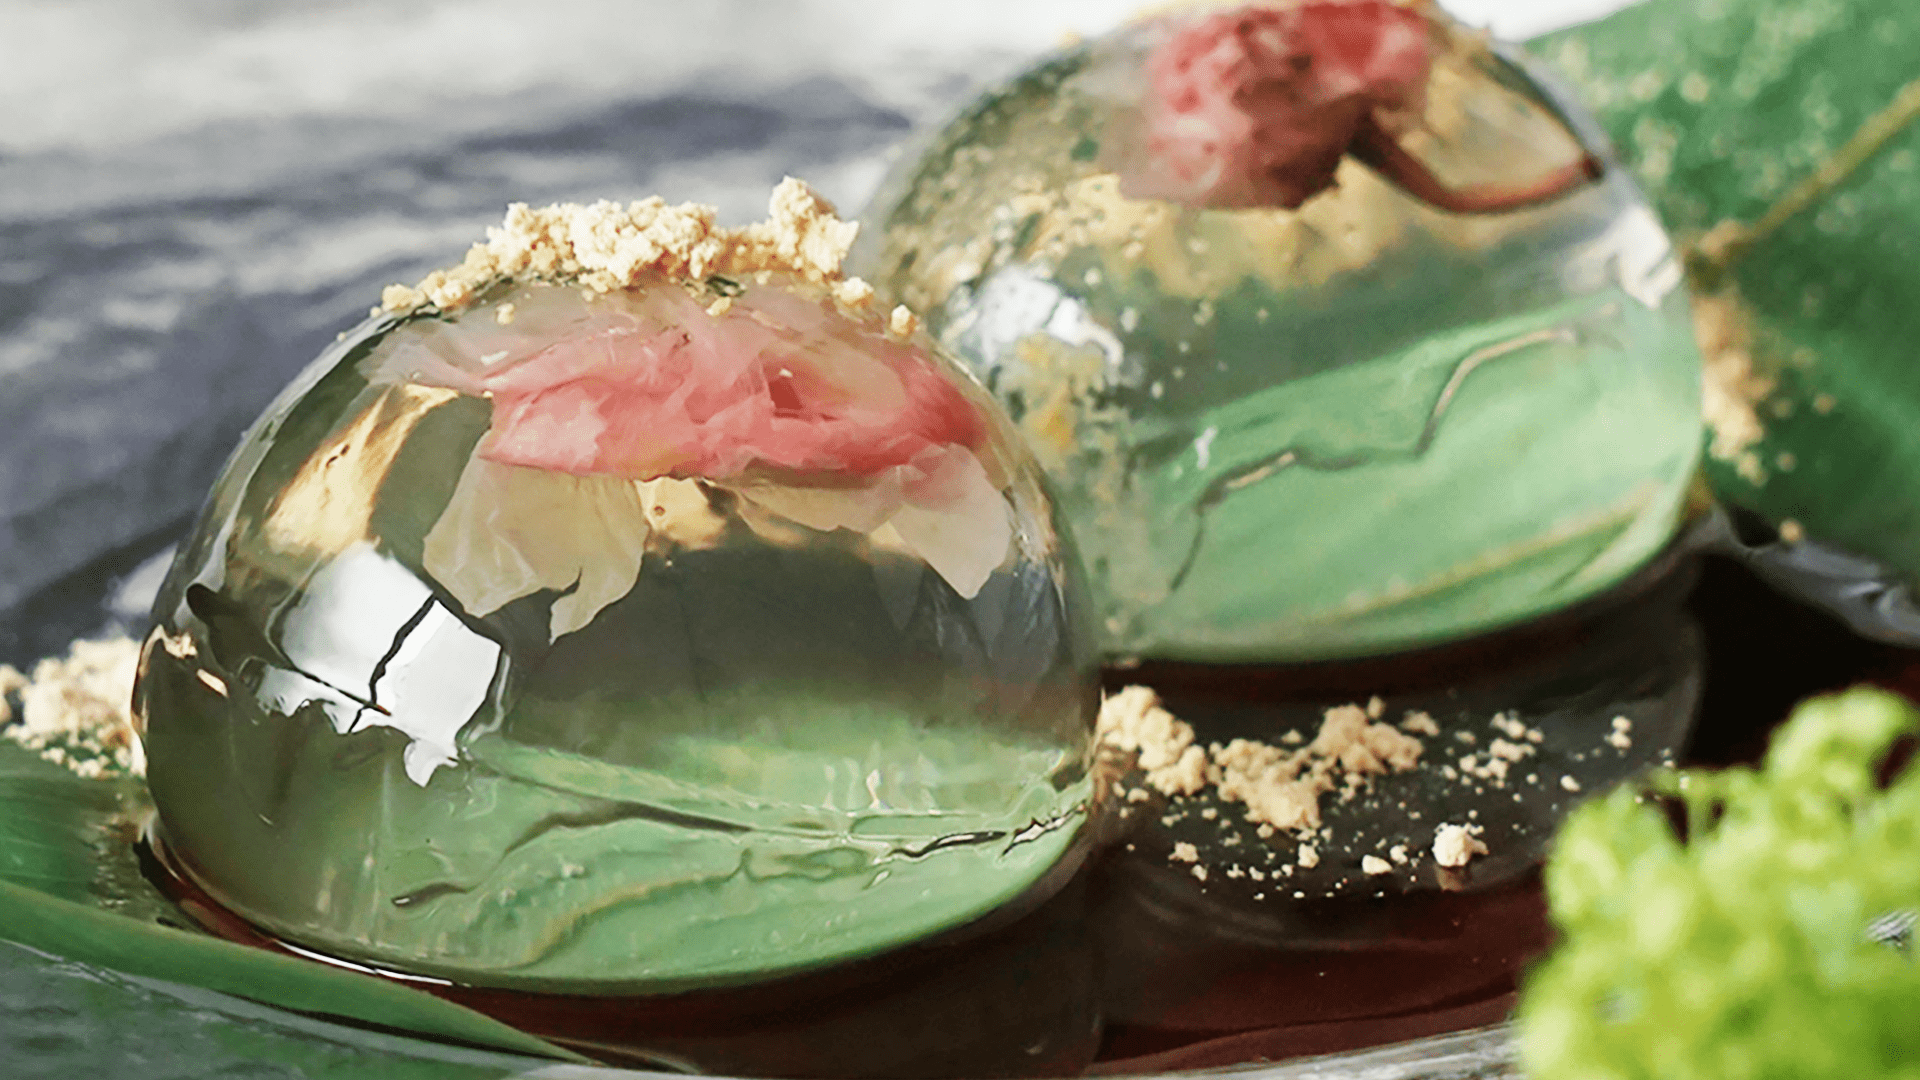 Raindrop Cakes are a real thing and they're now in Vancouver | Dished